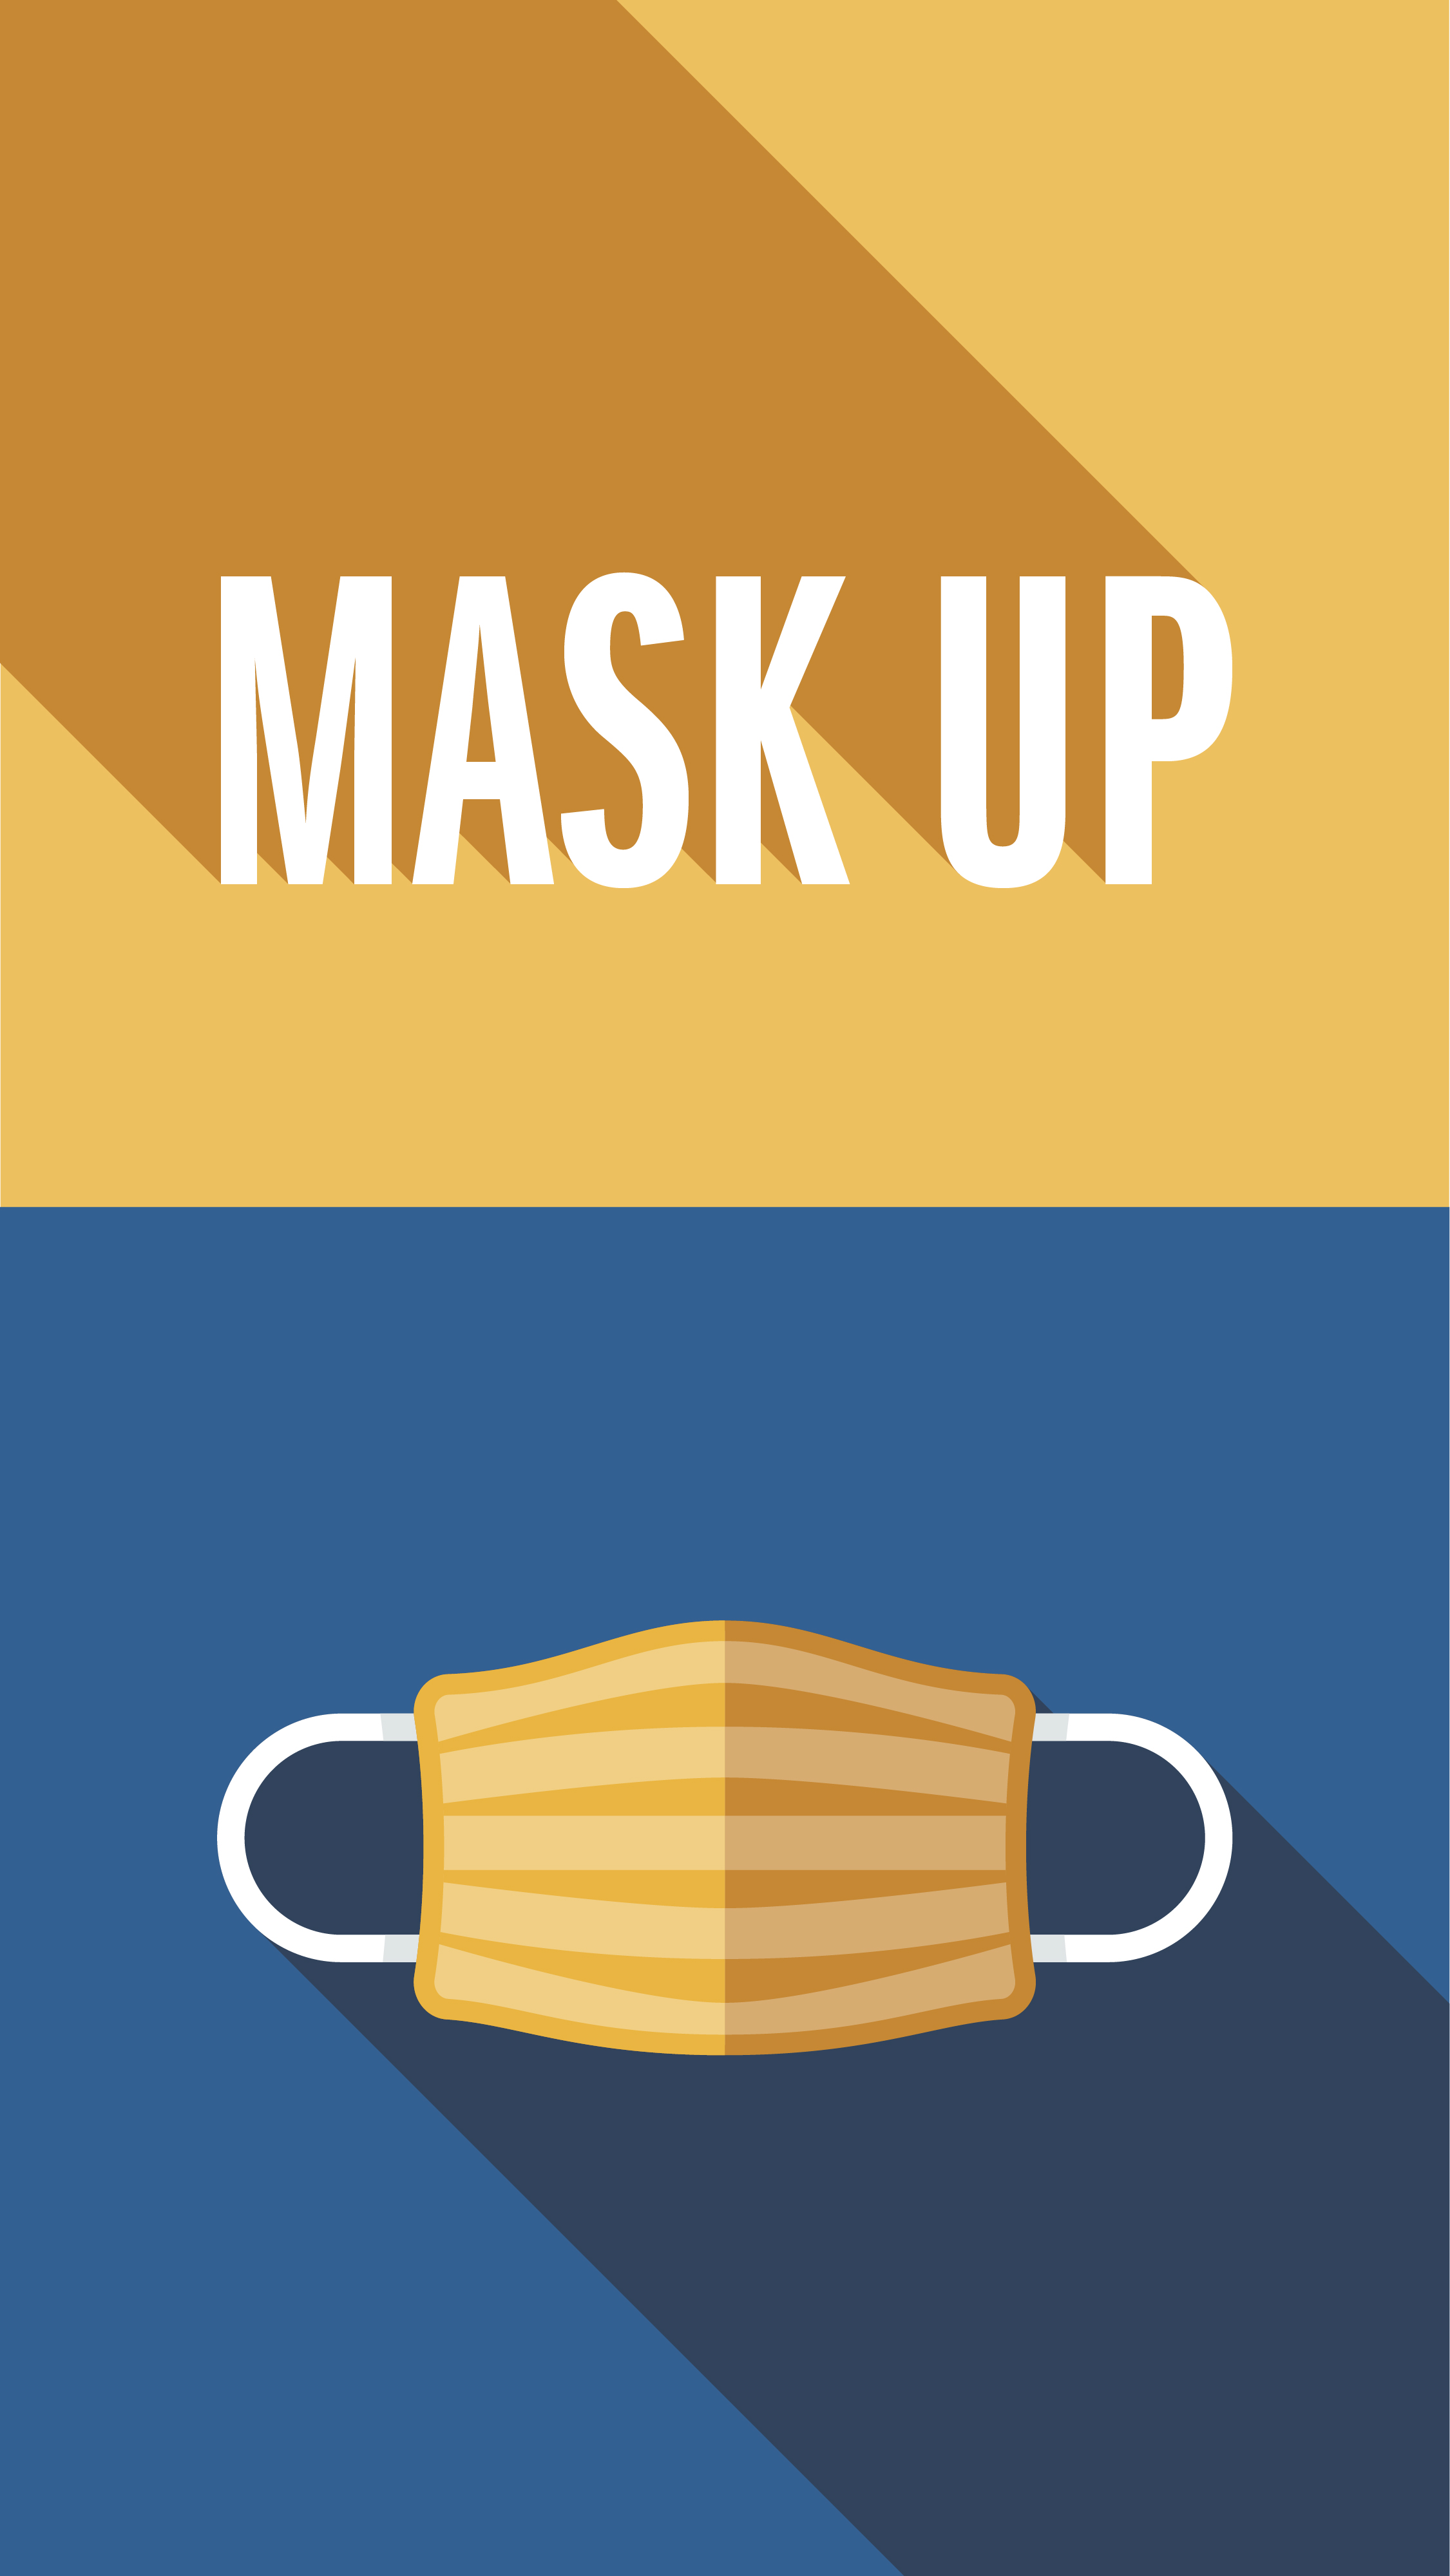 Mask up. Blue and gold.